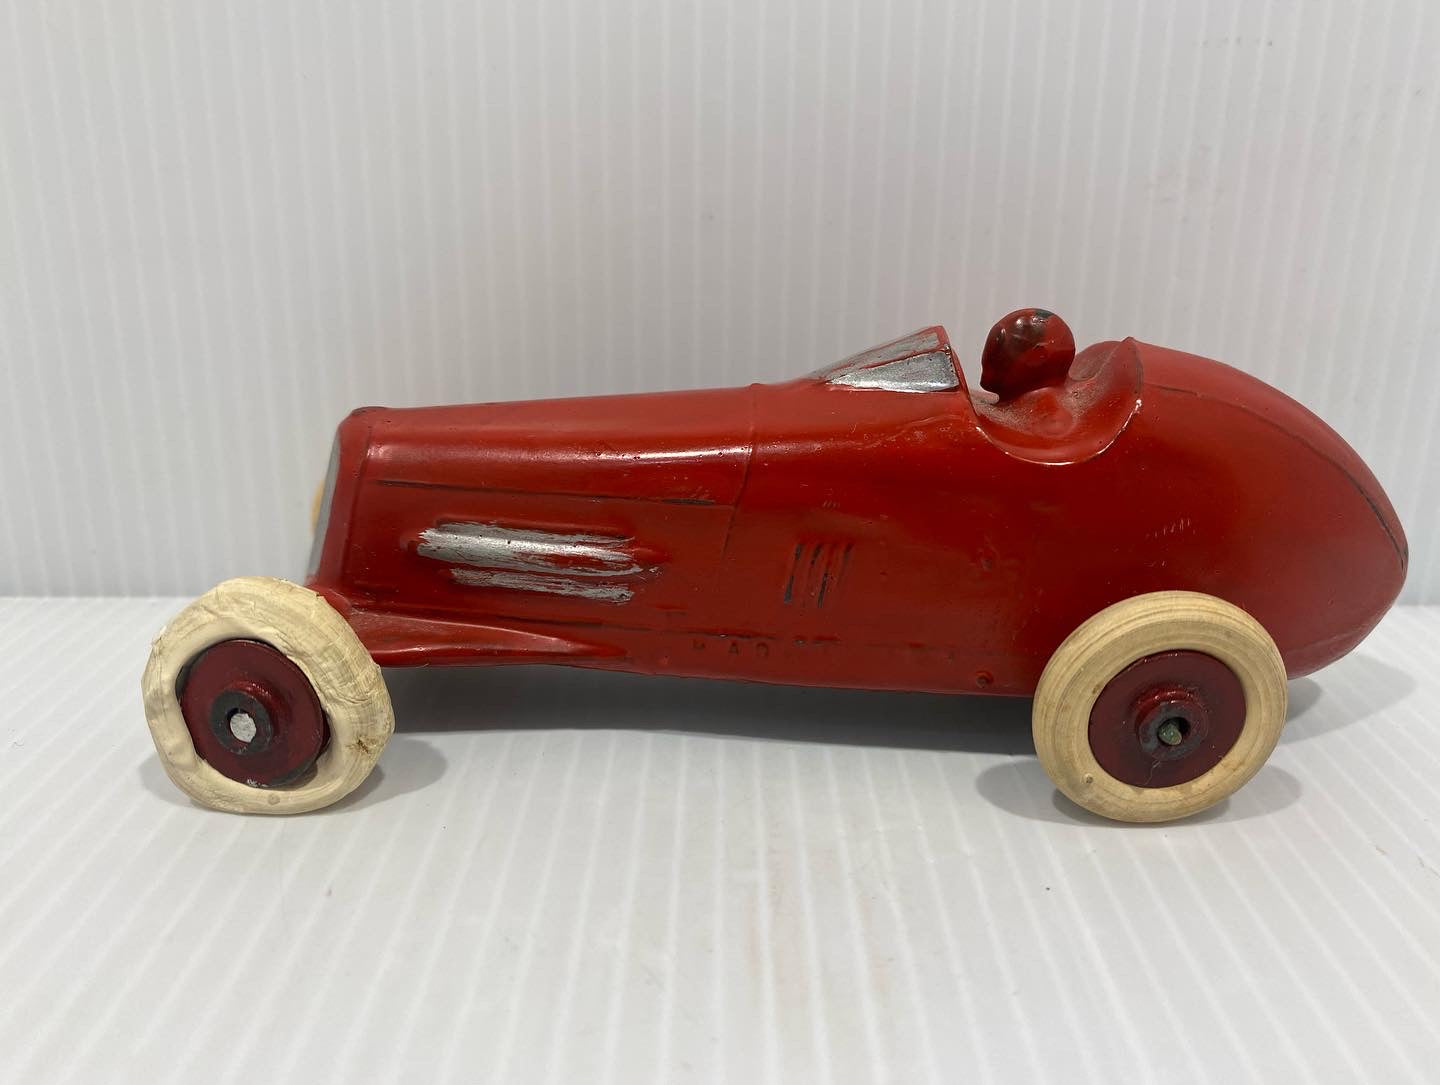 Rare Antique Savoye Pewter Toy Company boat-tail racer with driver , all original. Made in USA 1930's.